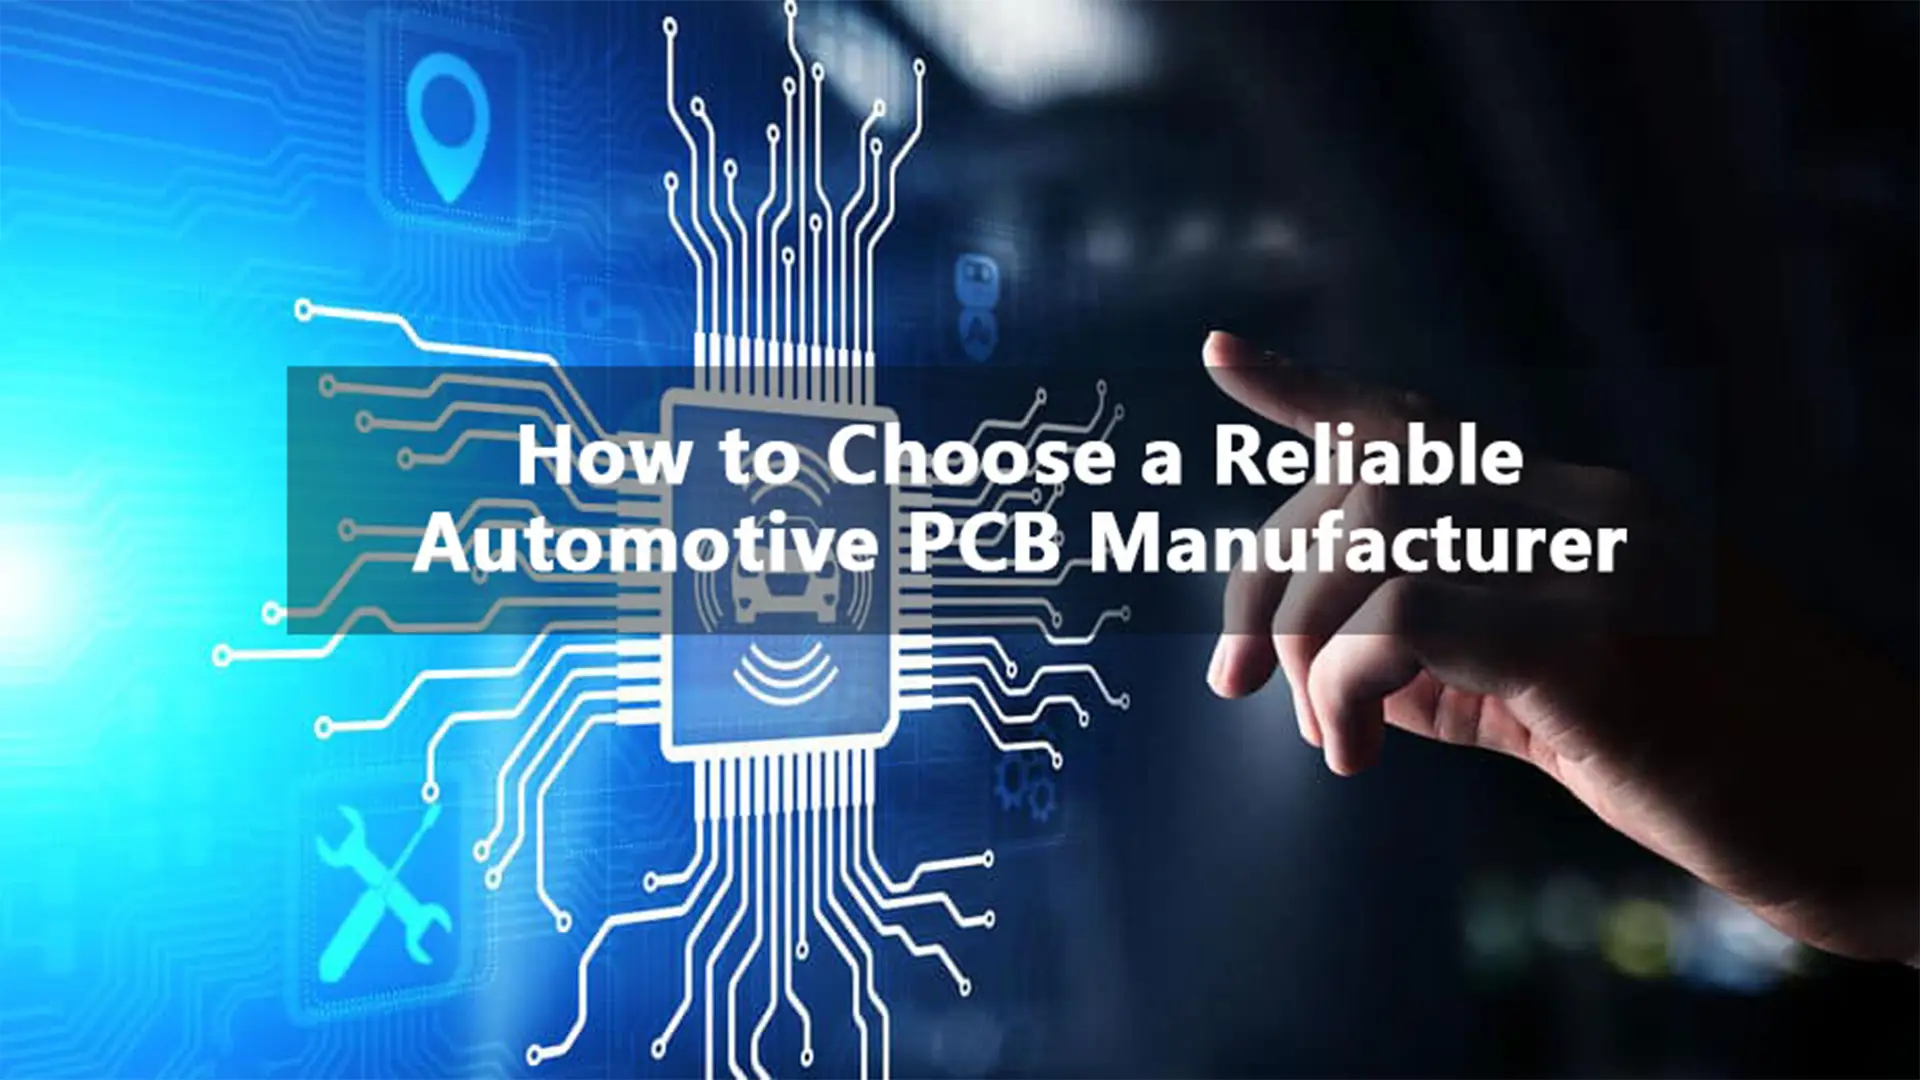 How to Choose a Reliable Automotive PCB Manufacturer